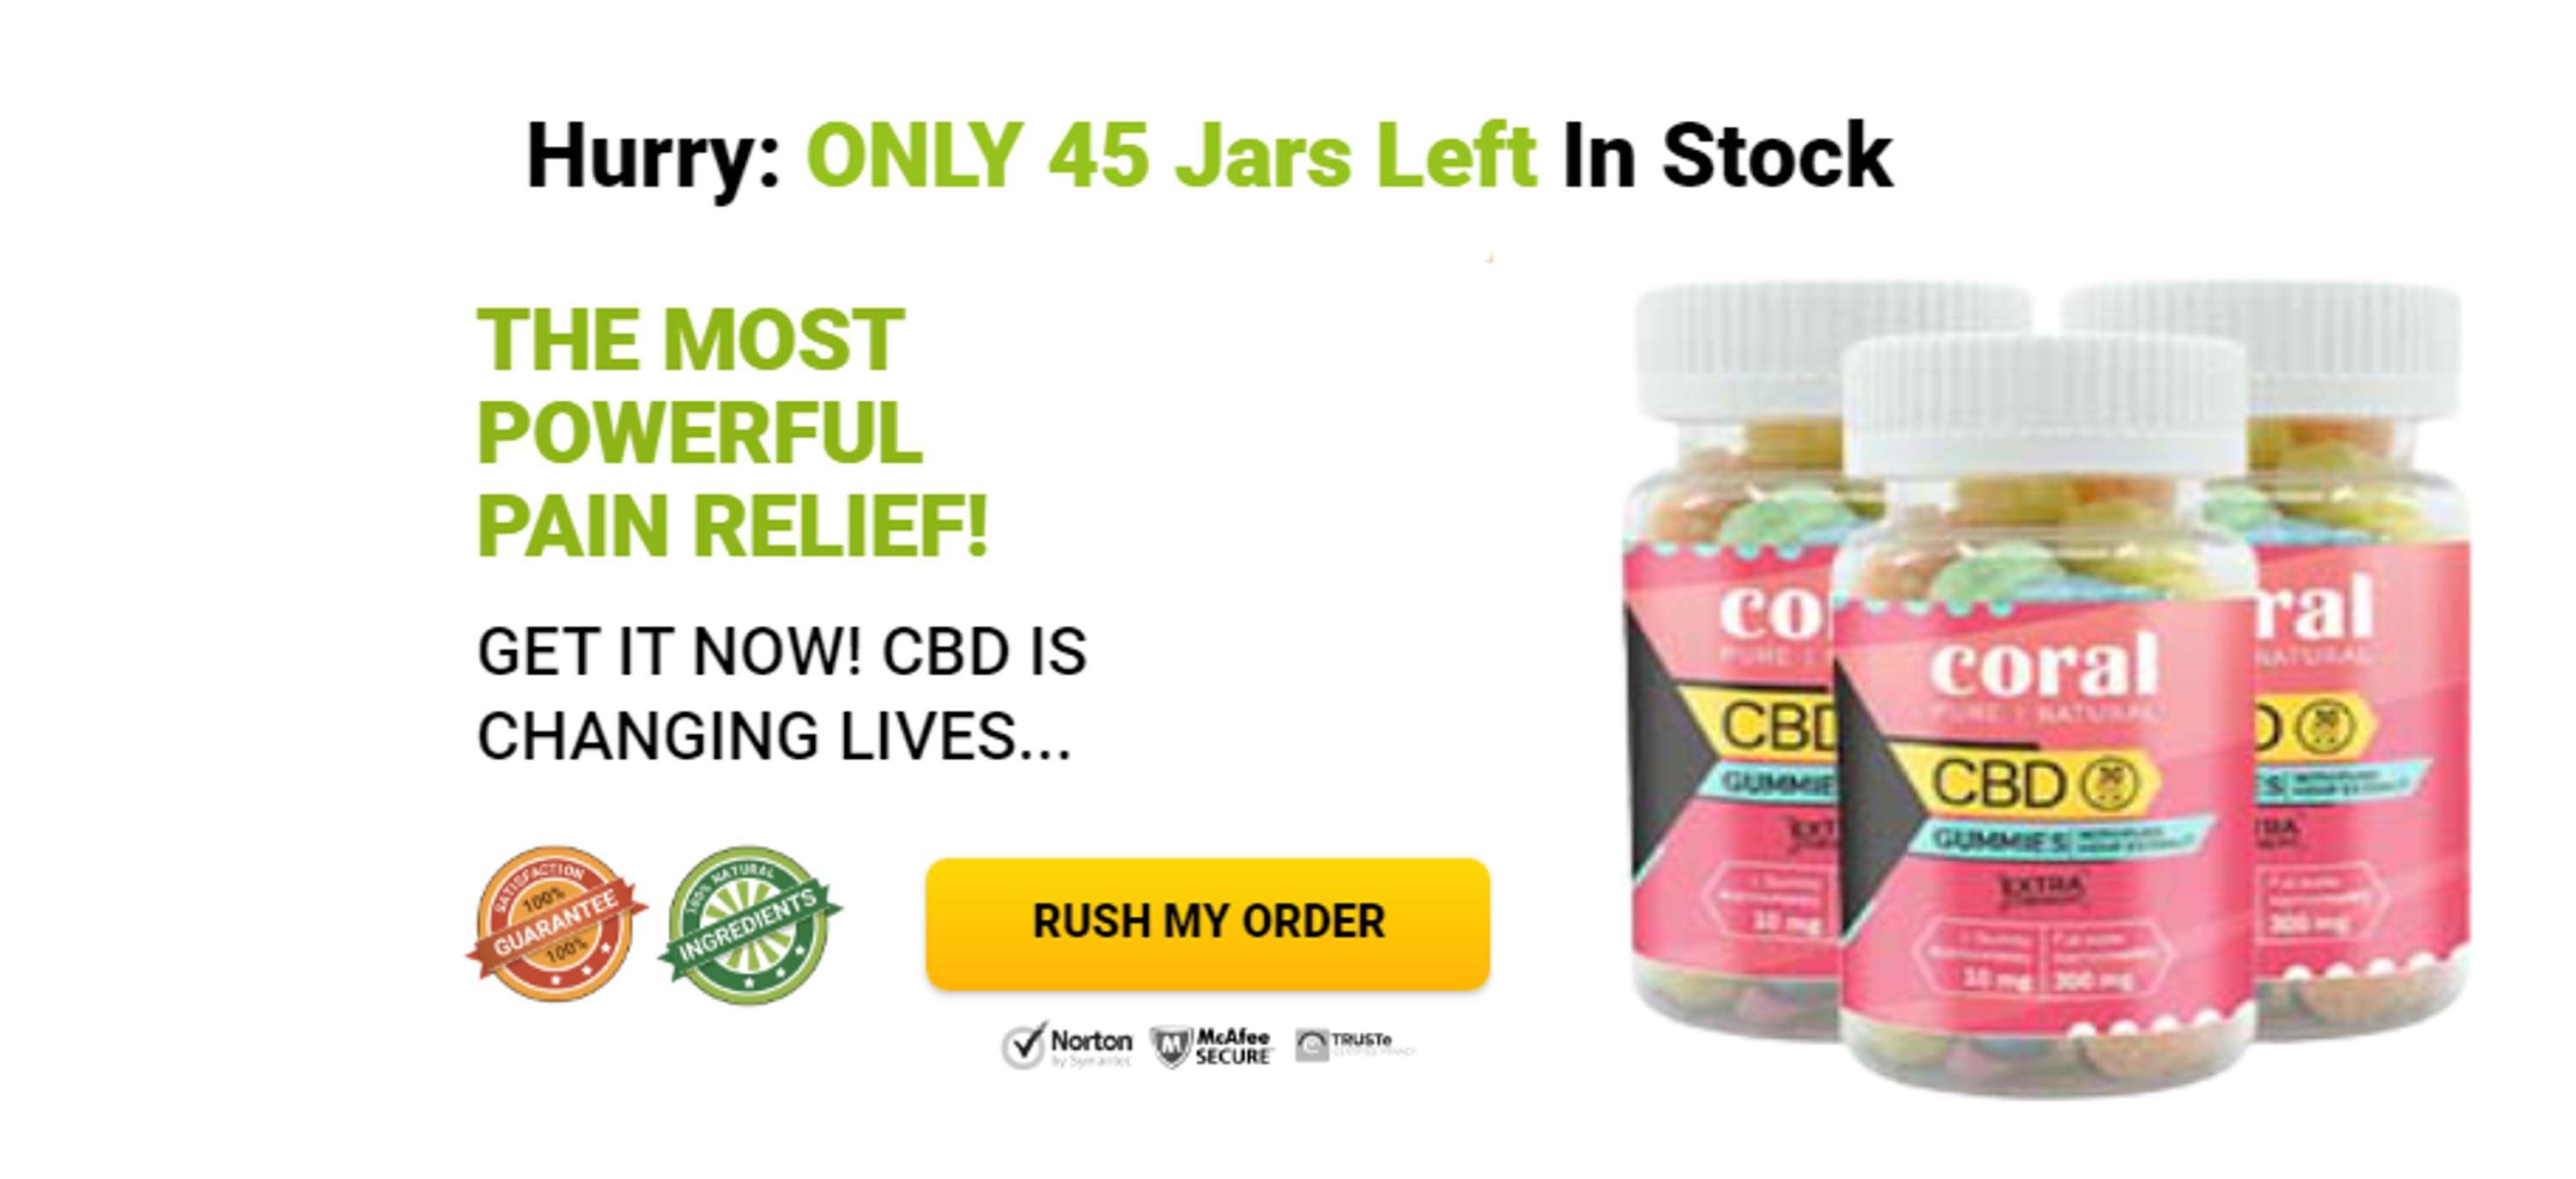 Coral CBD Gummies Reviews, Price, Benefits, Shark tank Reviews, Website,  Ingredients, Price, Cost, Uses, Side Effects | The Dots